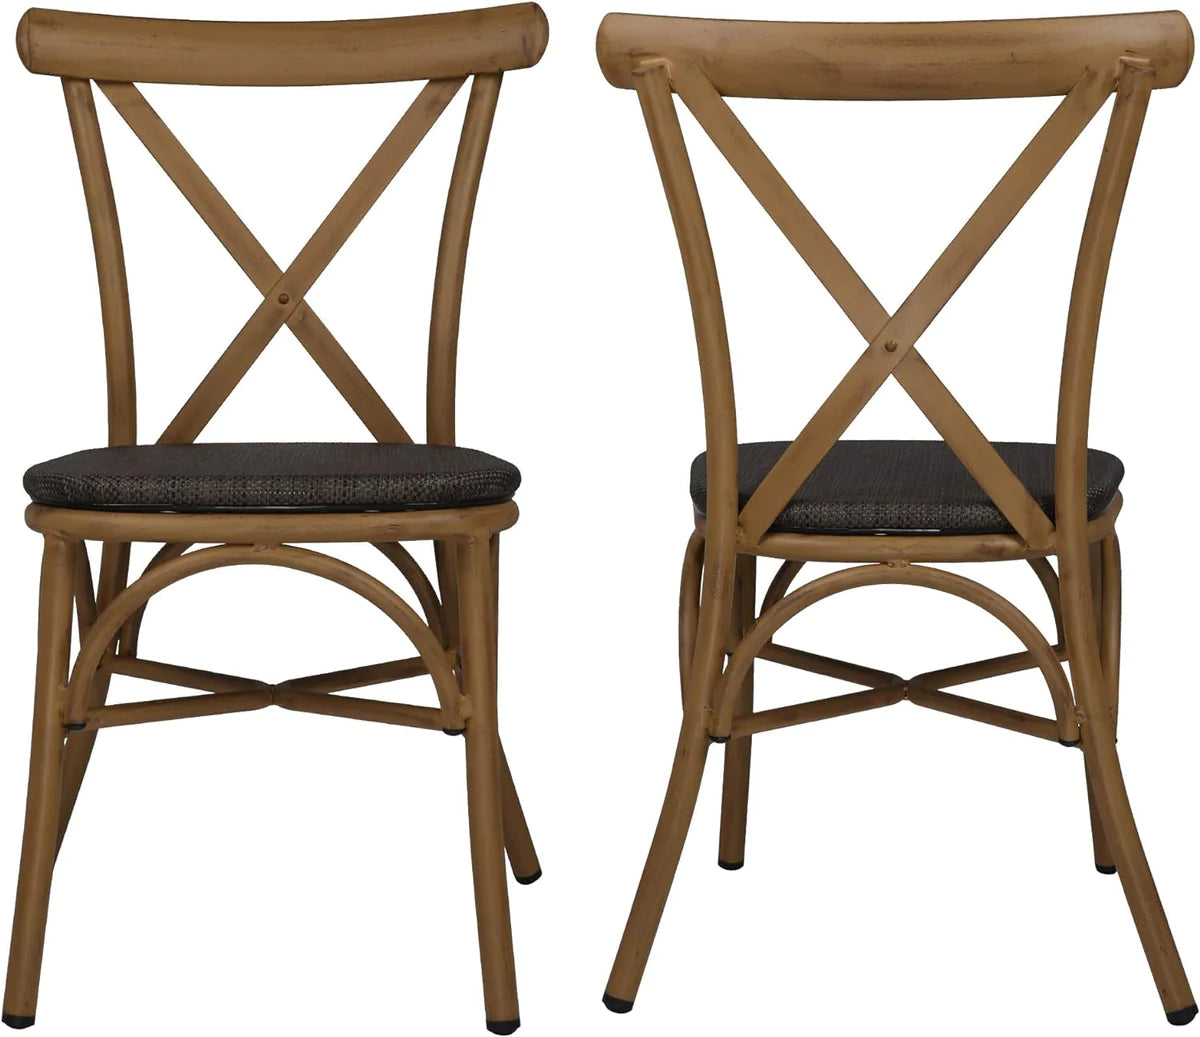 2 Set of Modern Dining Chairs with Aluminum Frame and Textile Fabric, X Back